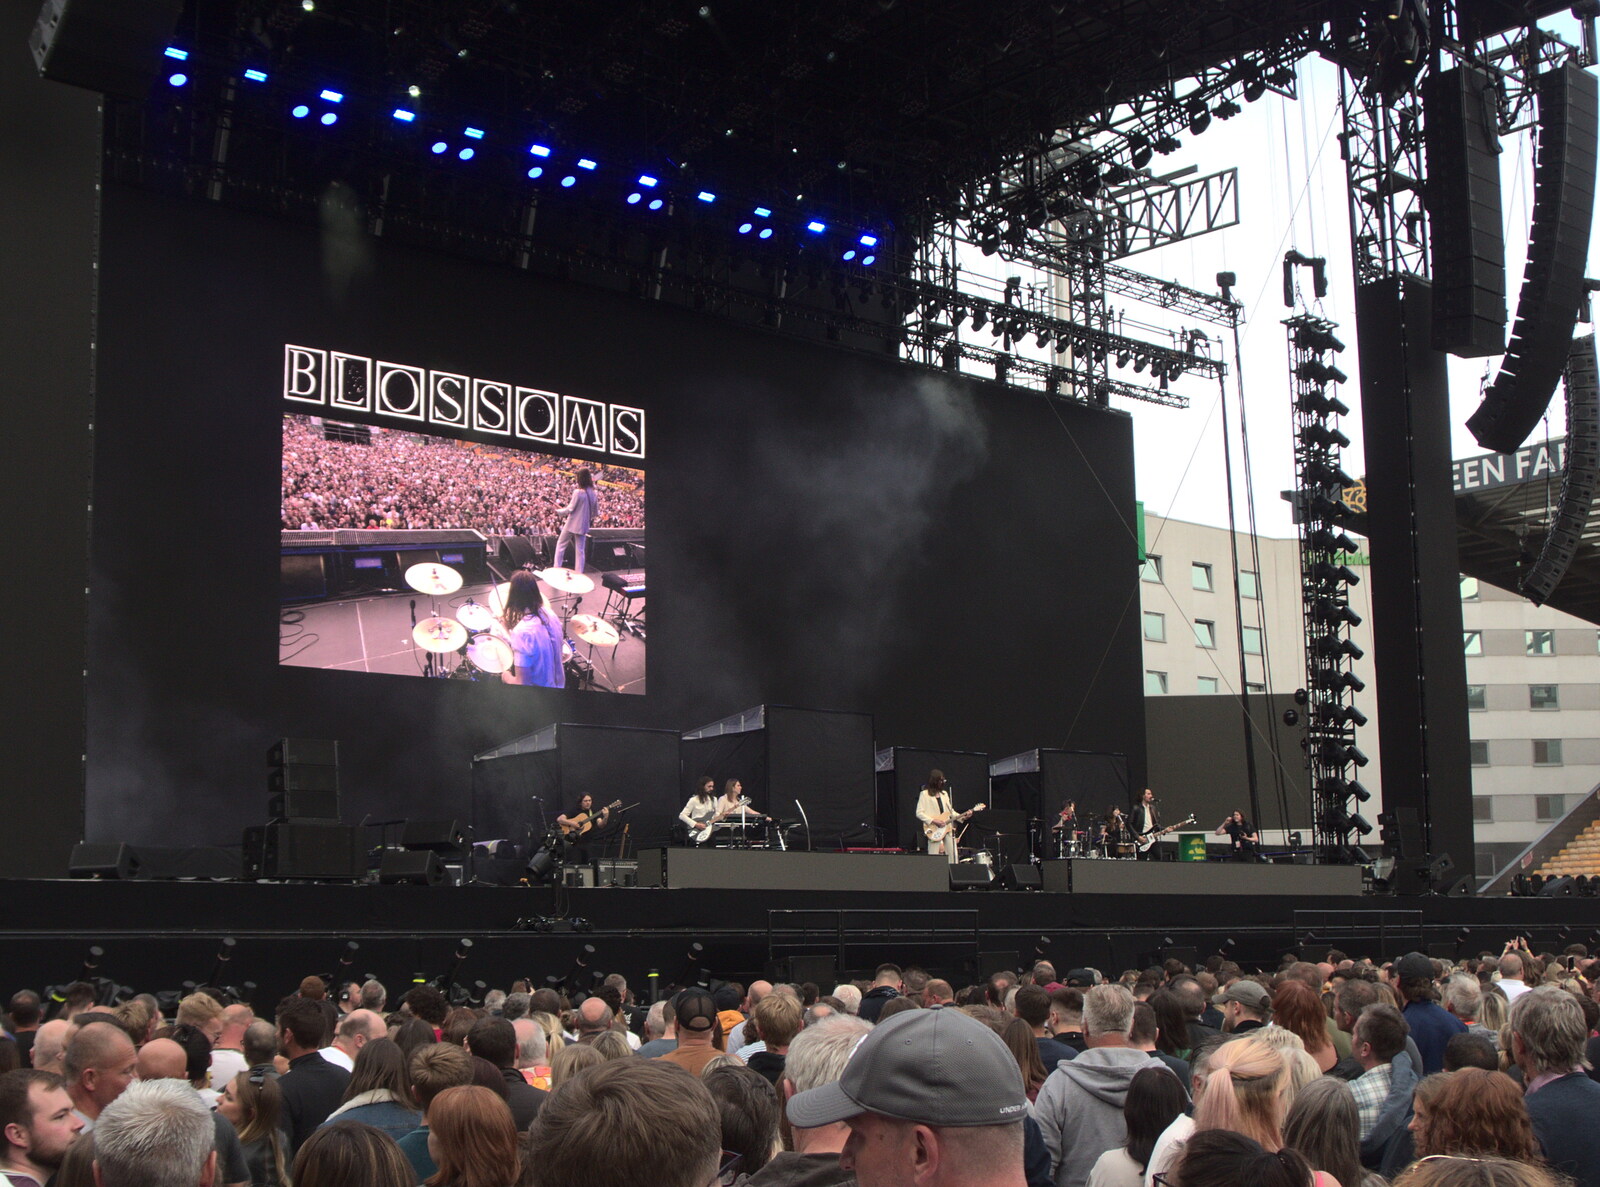 The Killers at Carrow Road, Norwich, Norfolk - 9th June 2022: Support act Blossoms is doing their thing